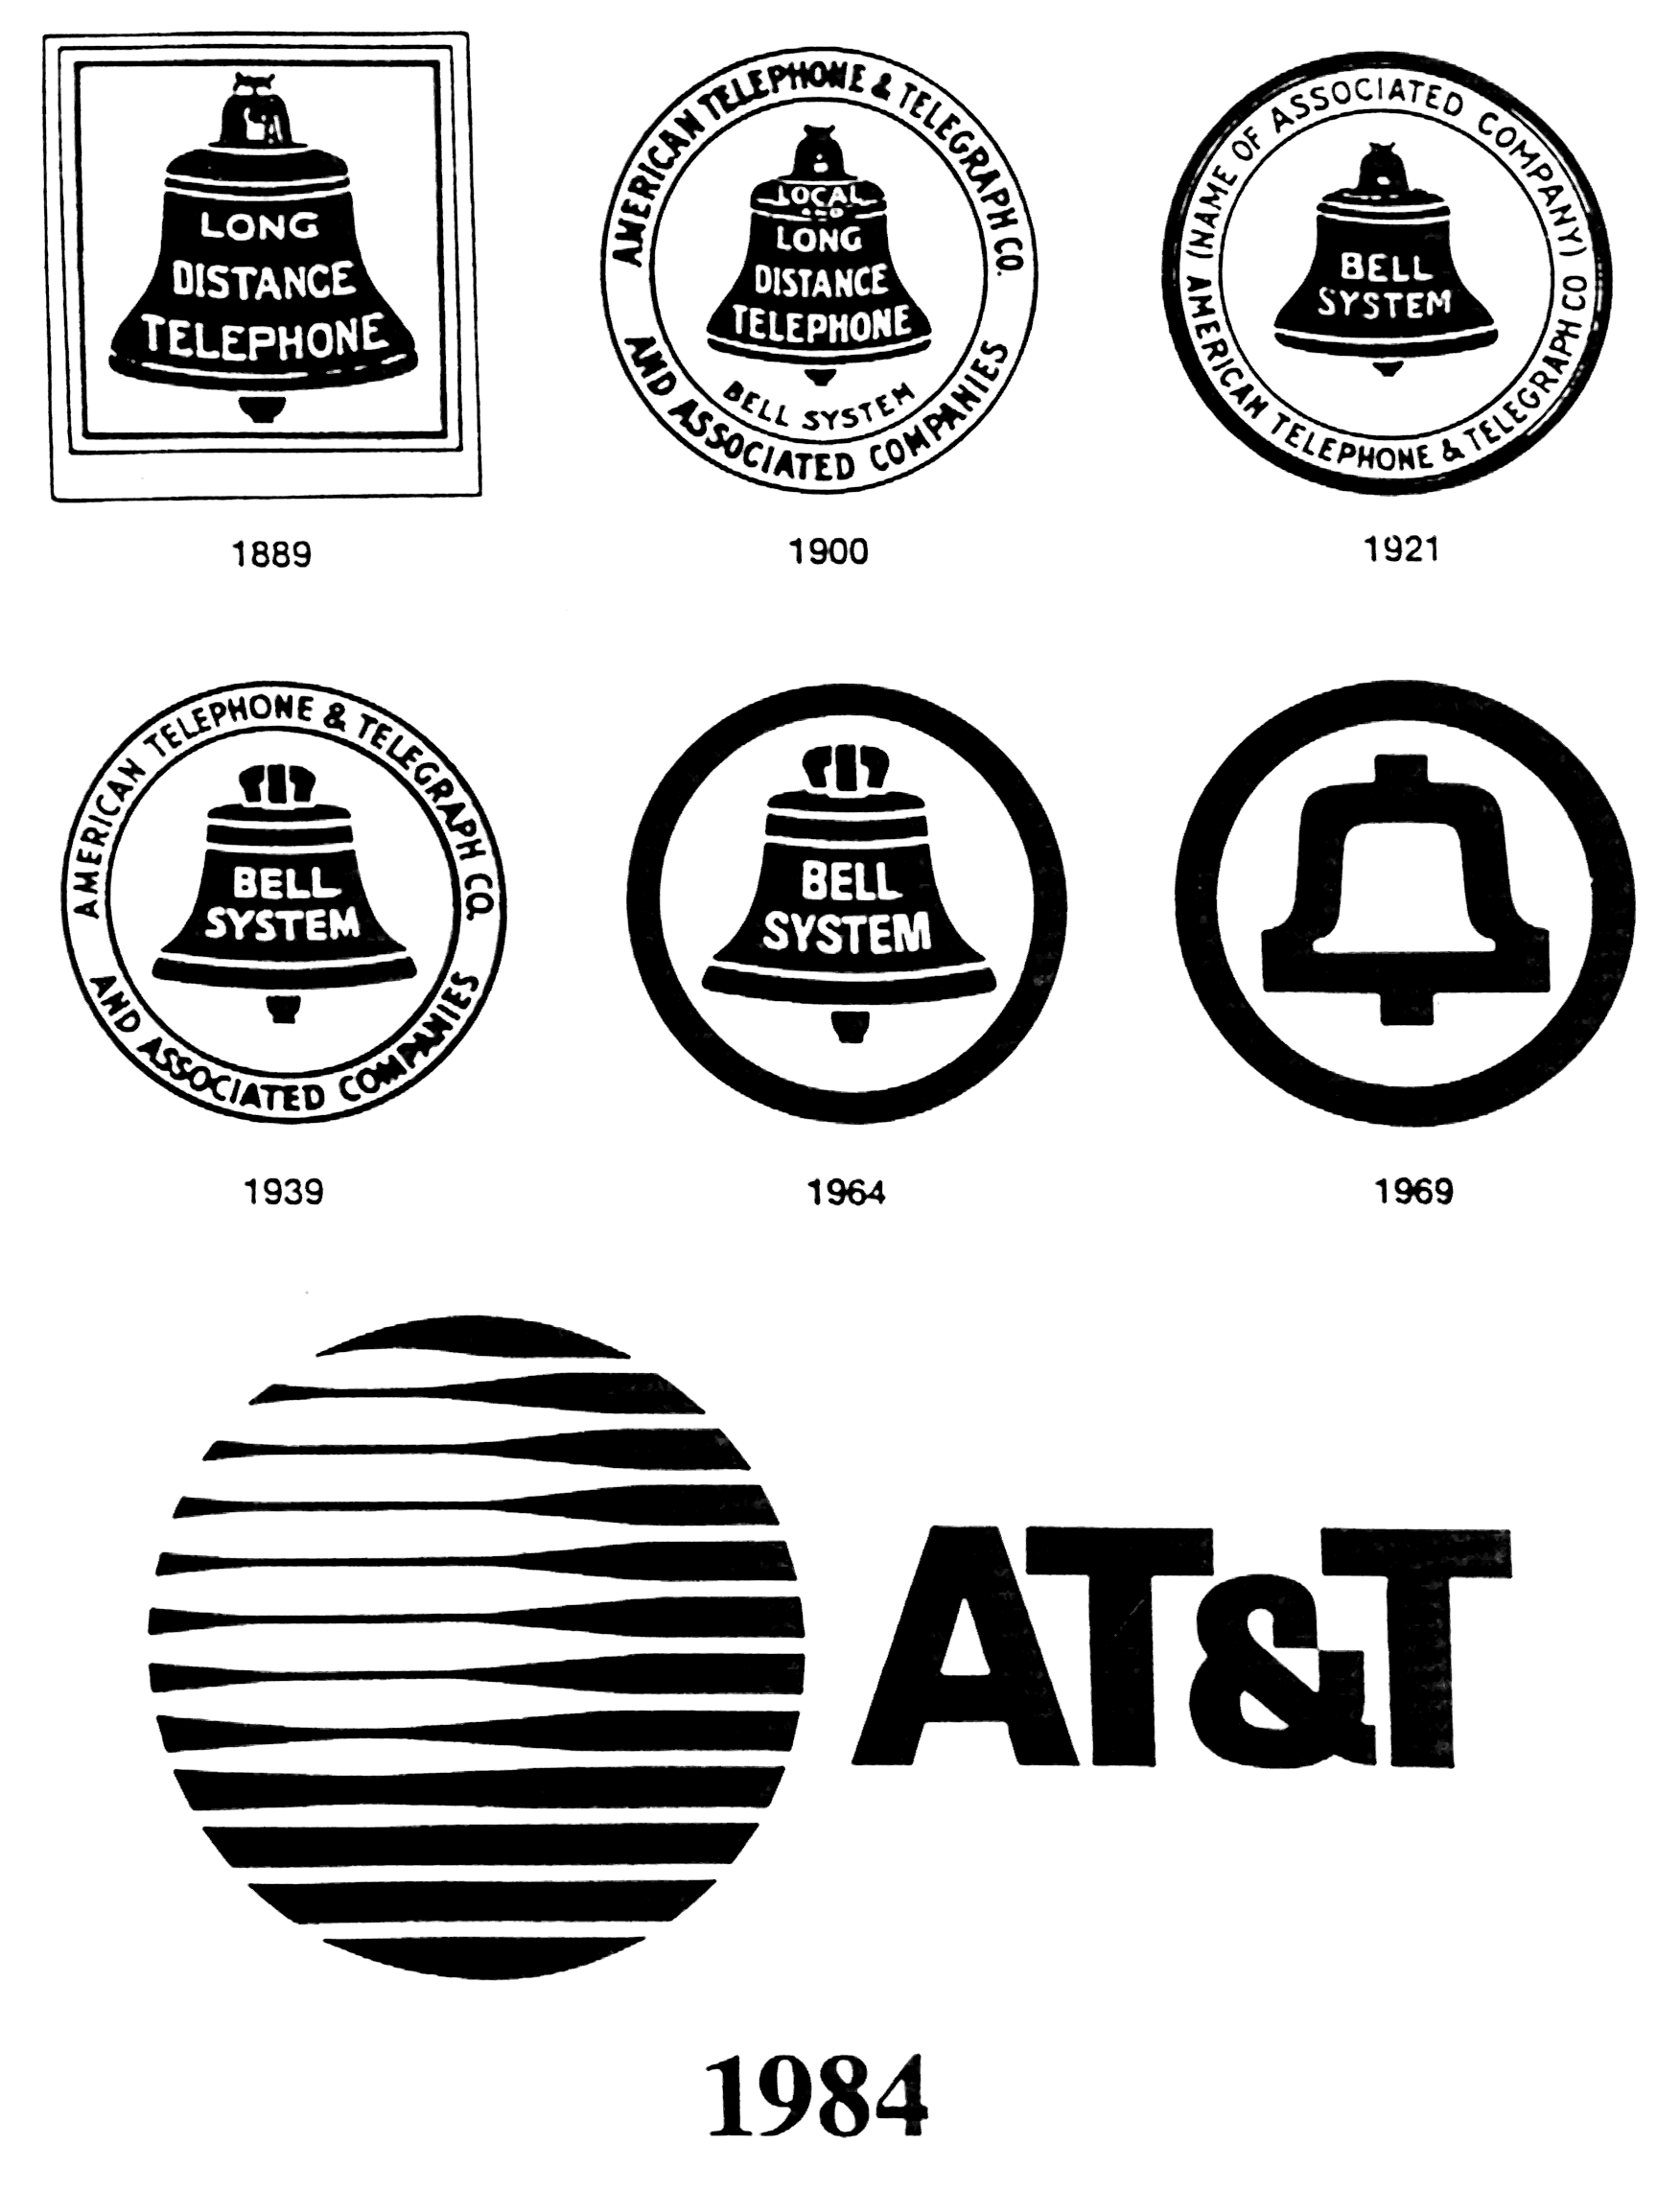 Old Phone Company Logo - American Telephone and Telegraph and Bell System logos thru